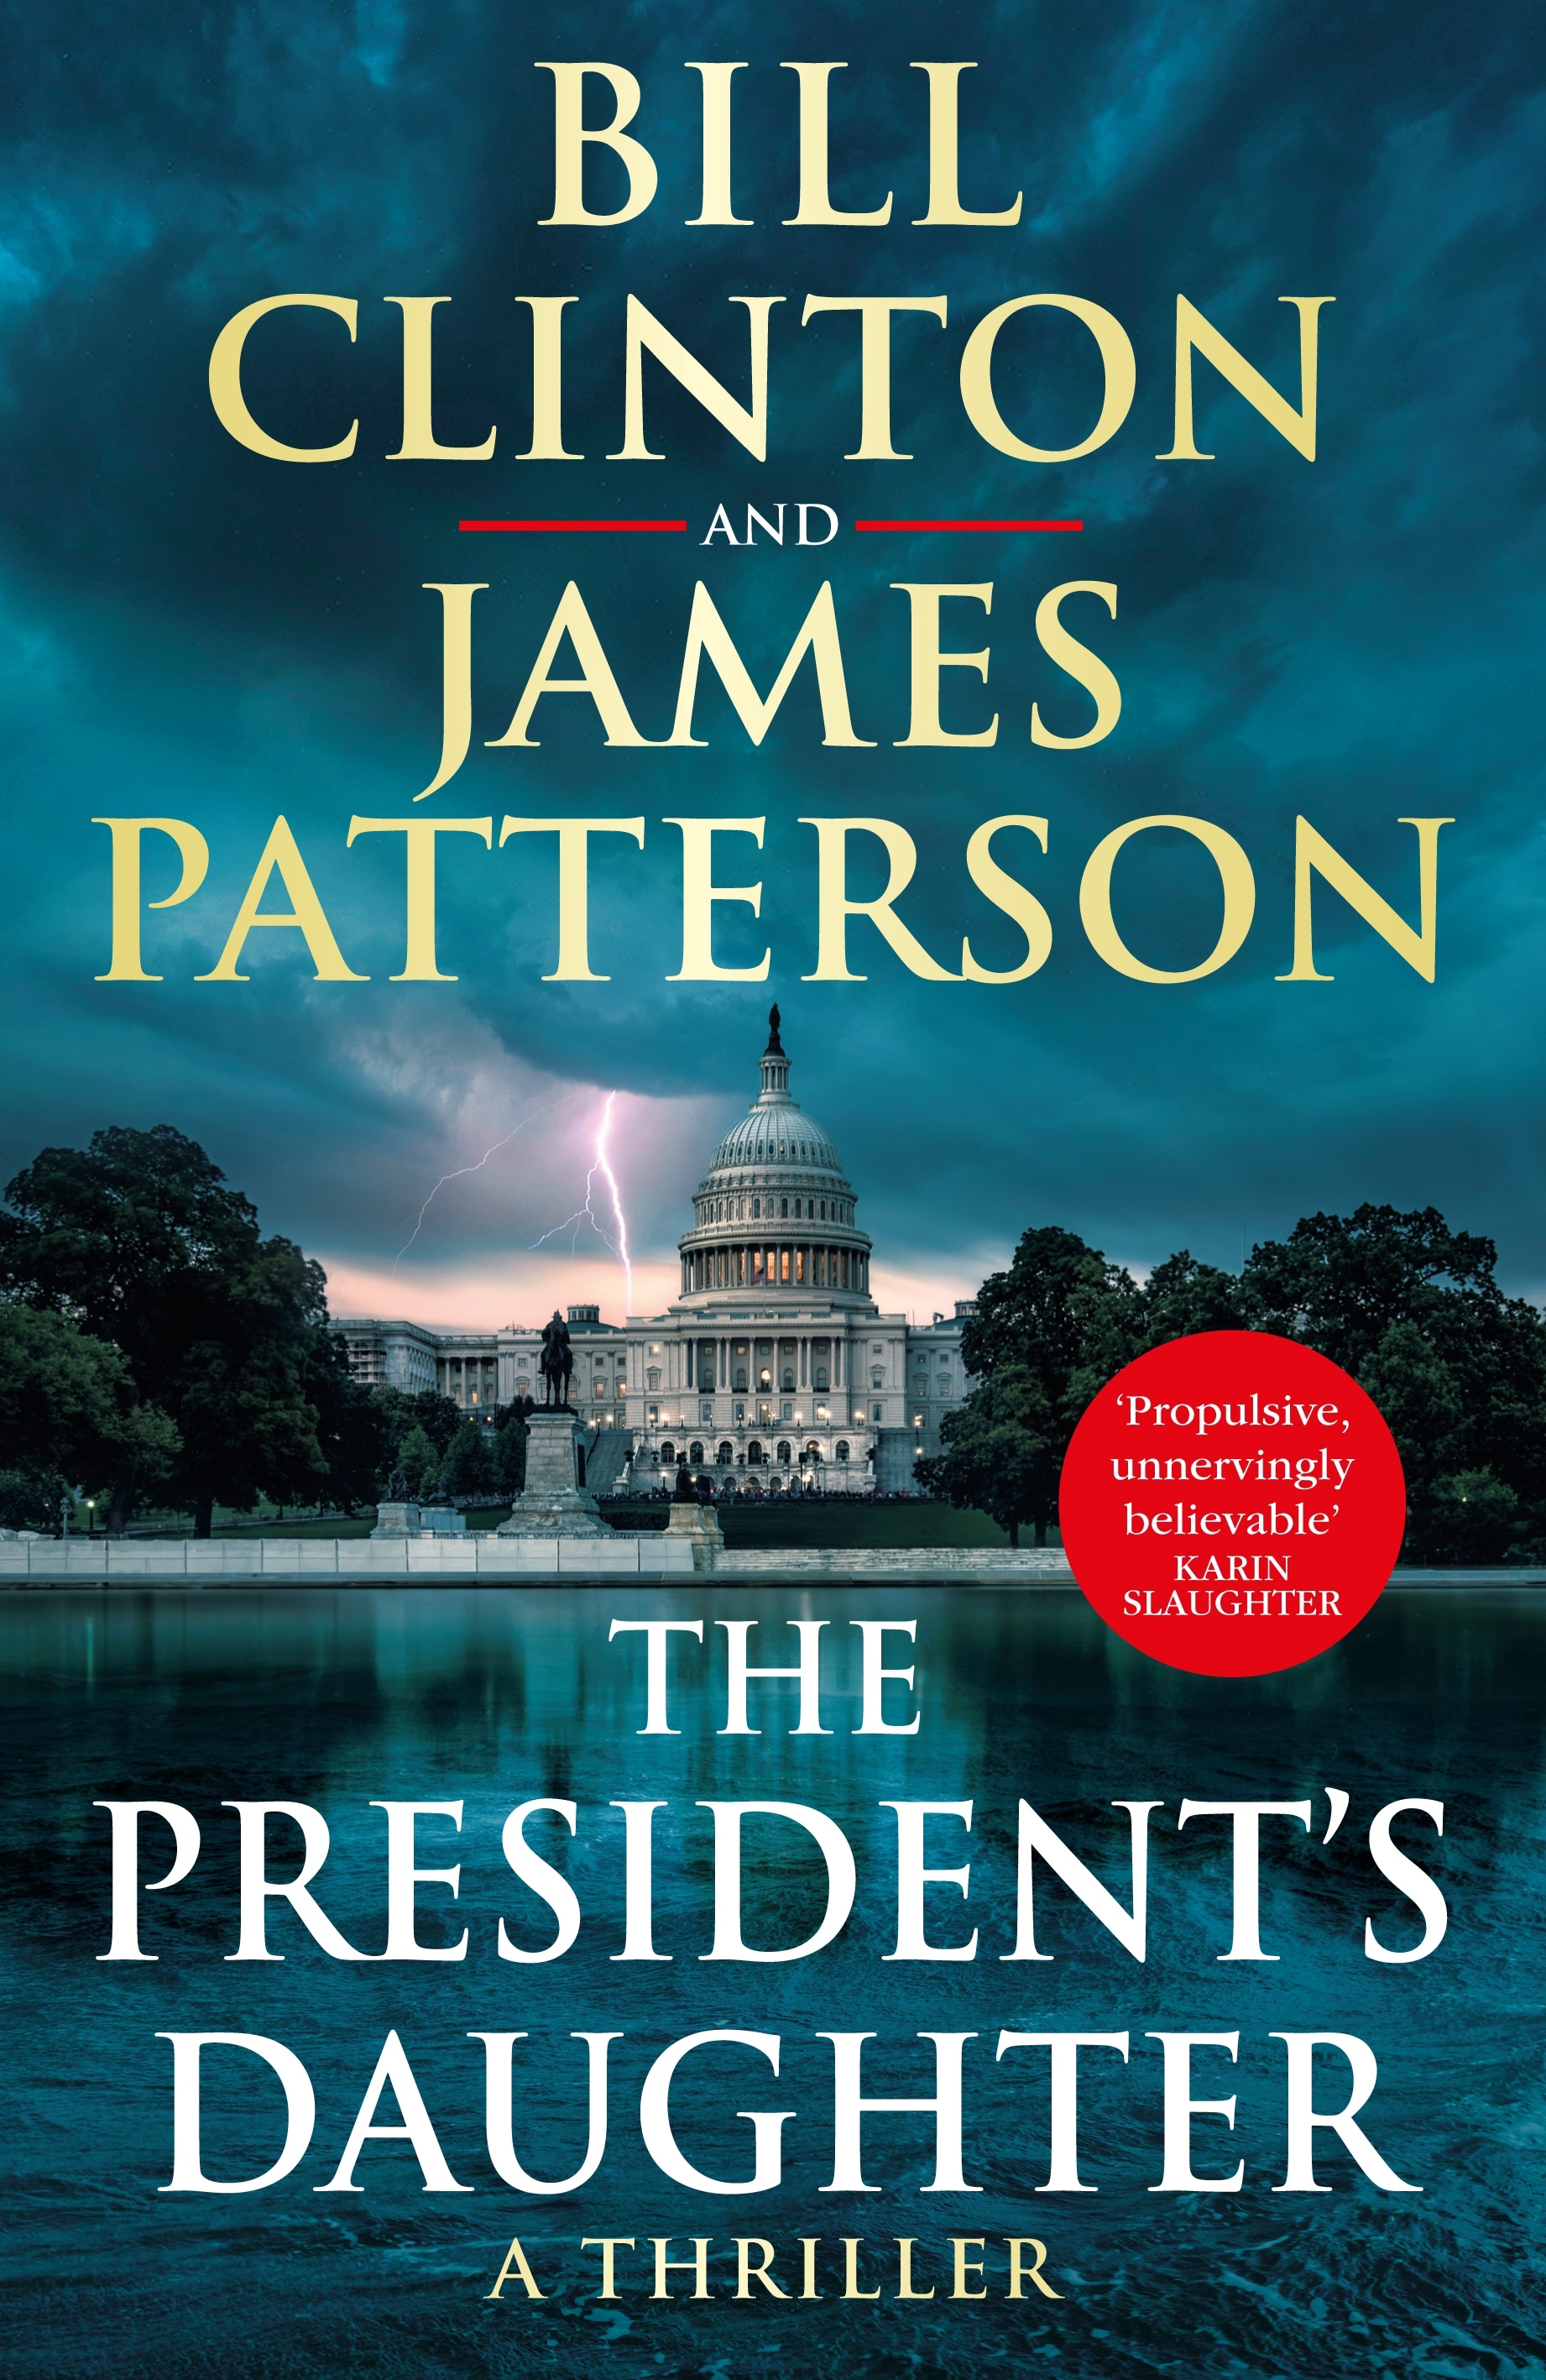 Book “The President’s Daughter” by President Bill Clinton, James Patterson — June 7, 2021